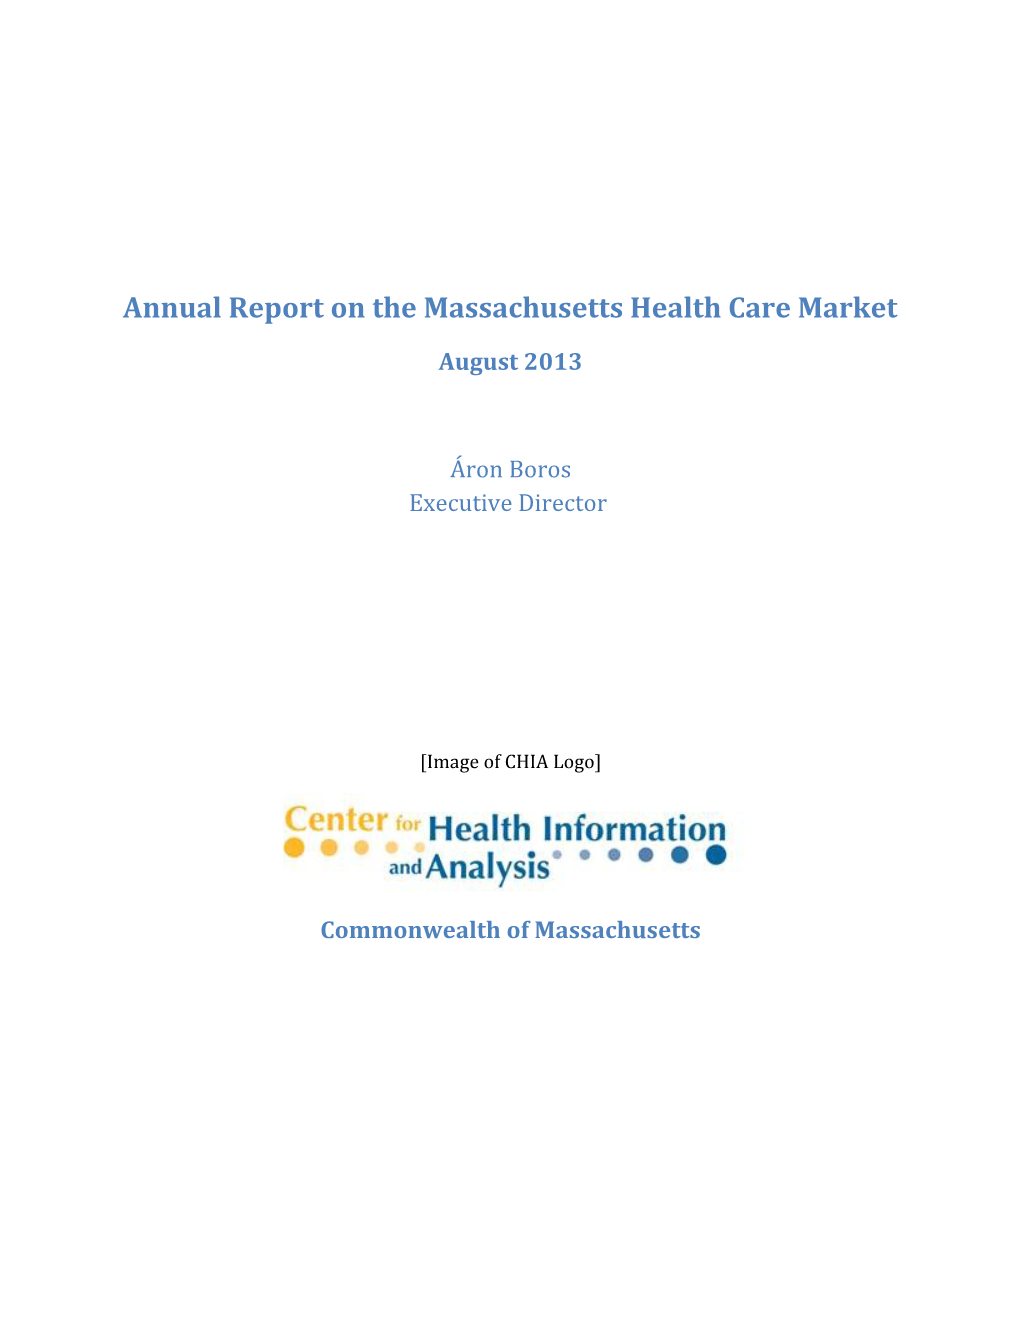 Annual Report on the Massachusetts Health Care Market - August 2013